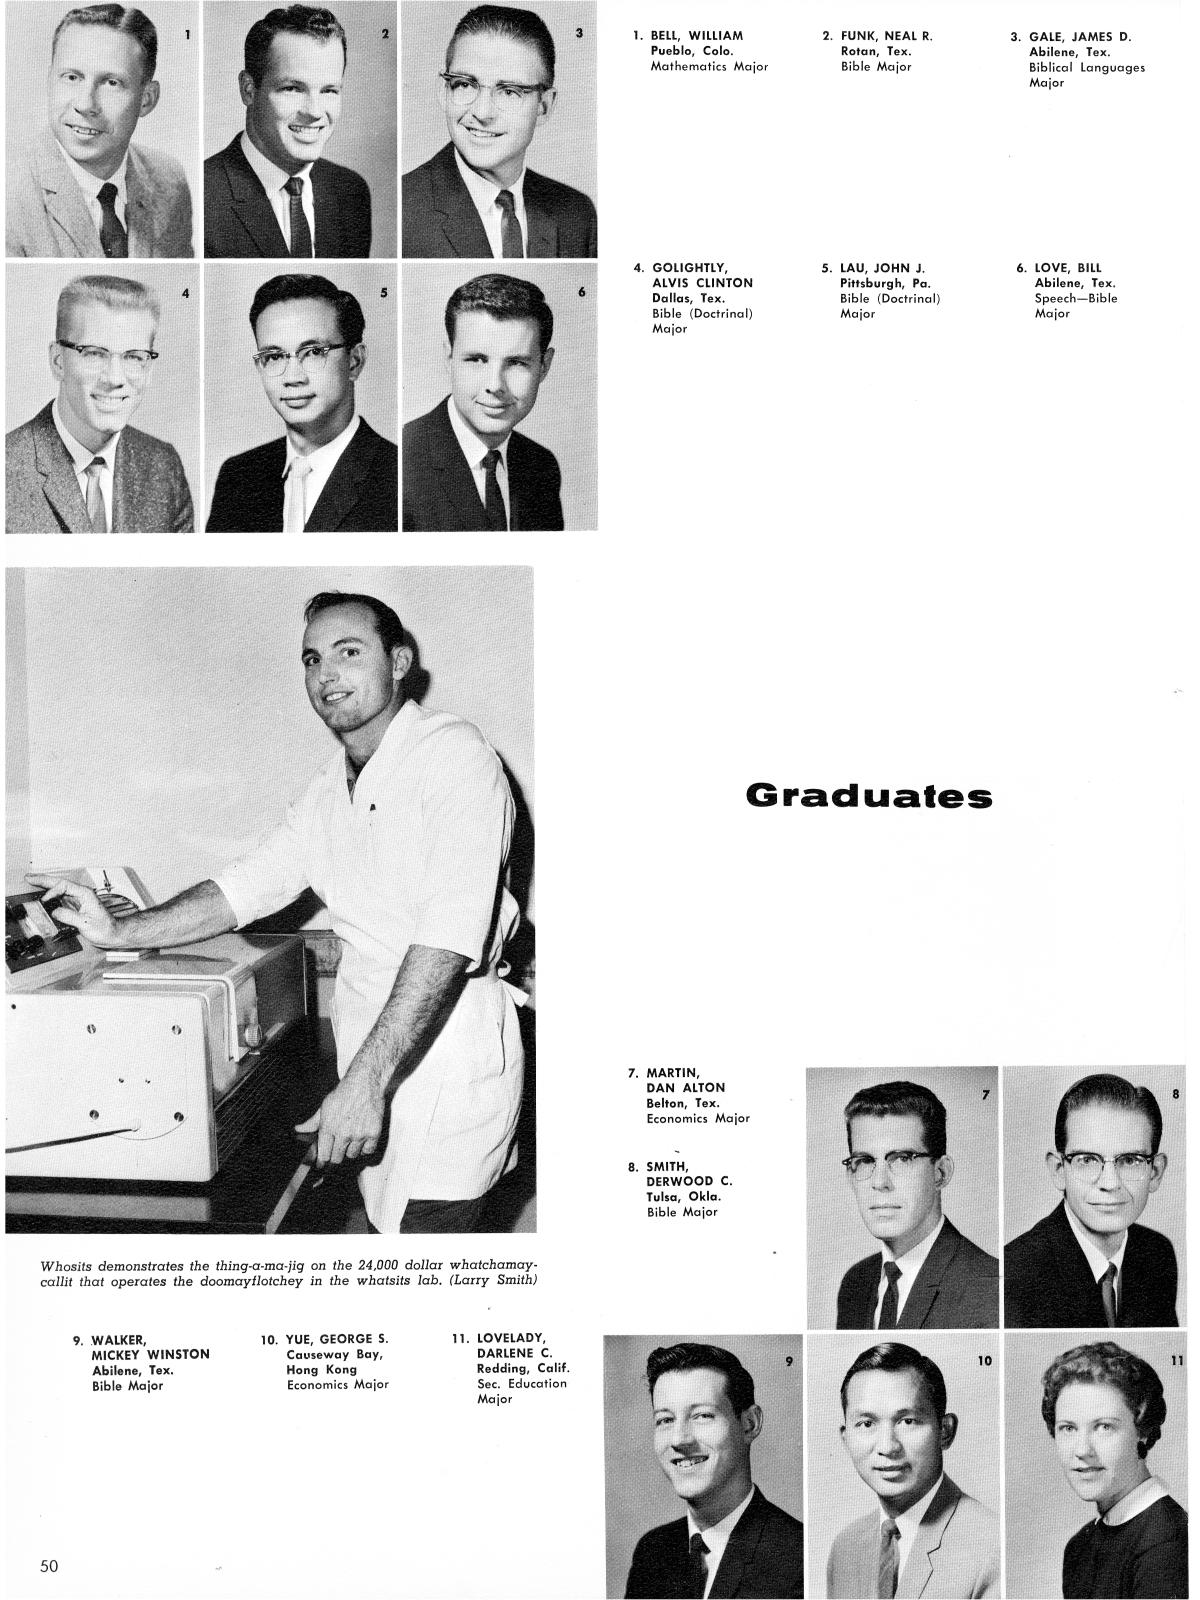 Prickly Pear, Yearbook of Abilene Christian College, 1961
                                                
                                                    50
                                                